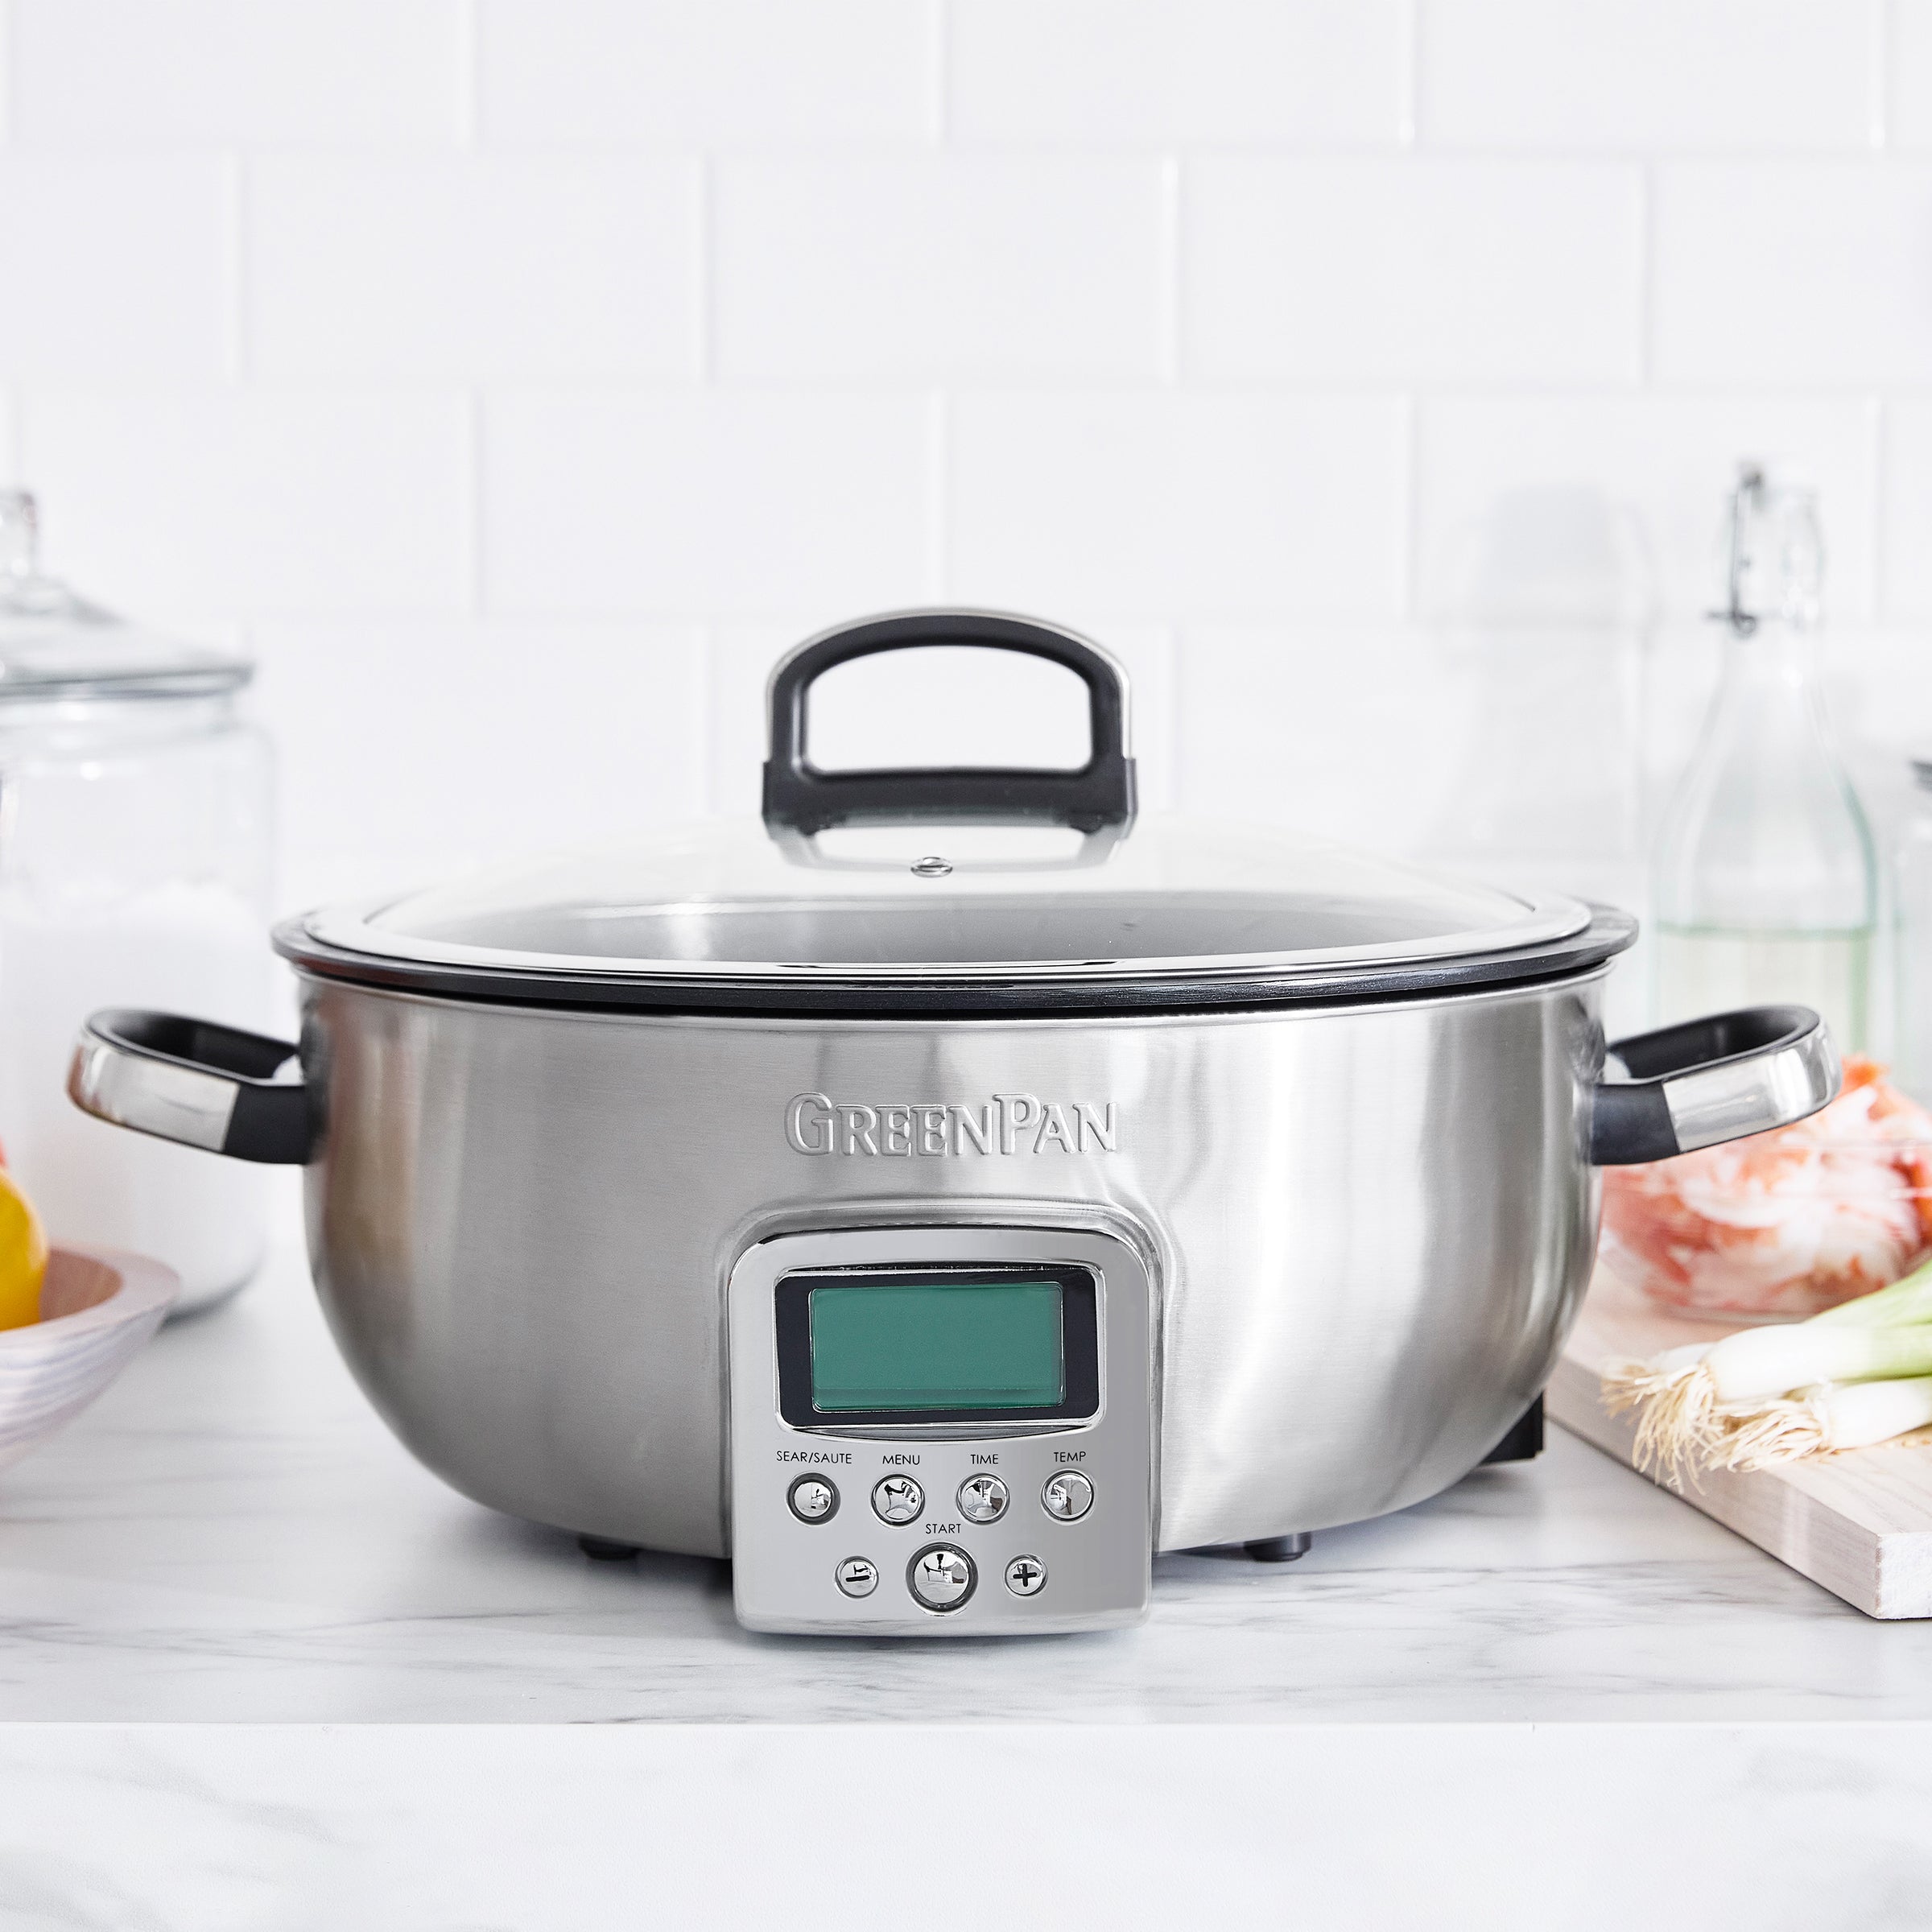 Omni cooker Stainless Steel 5.6L